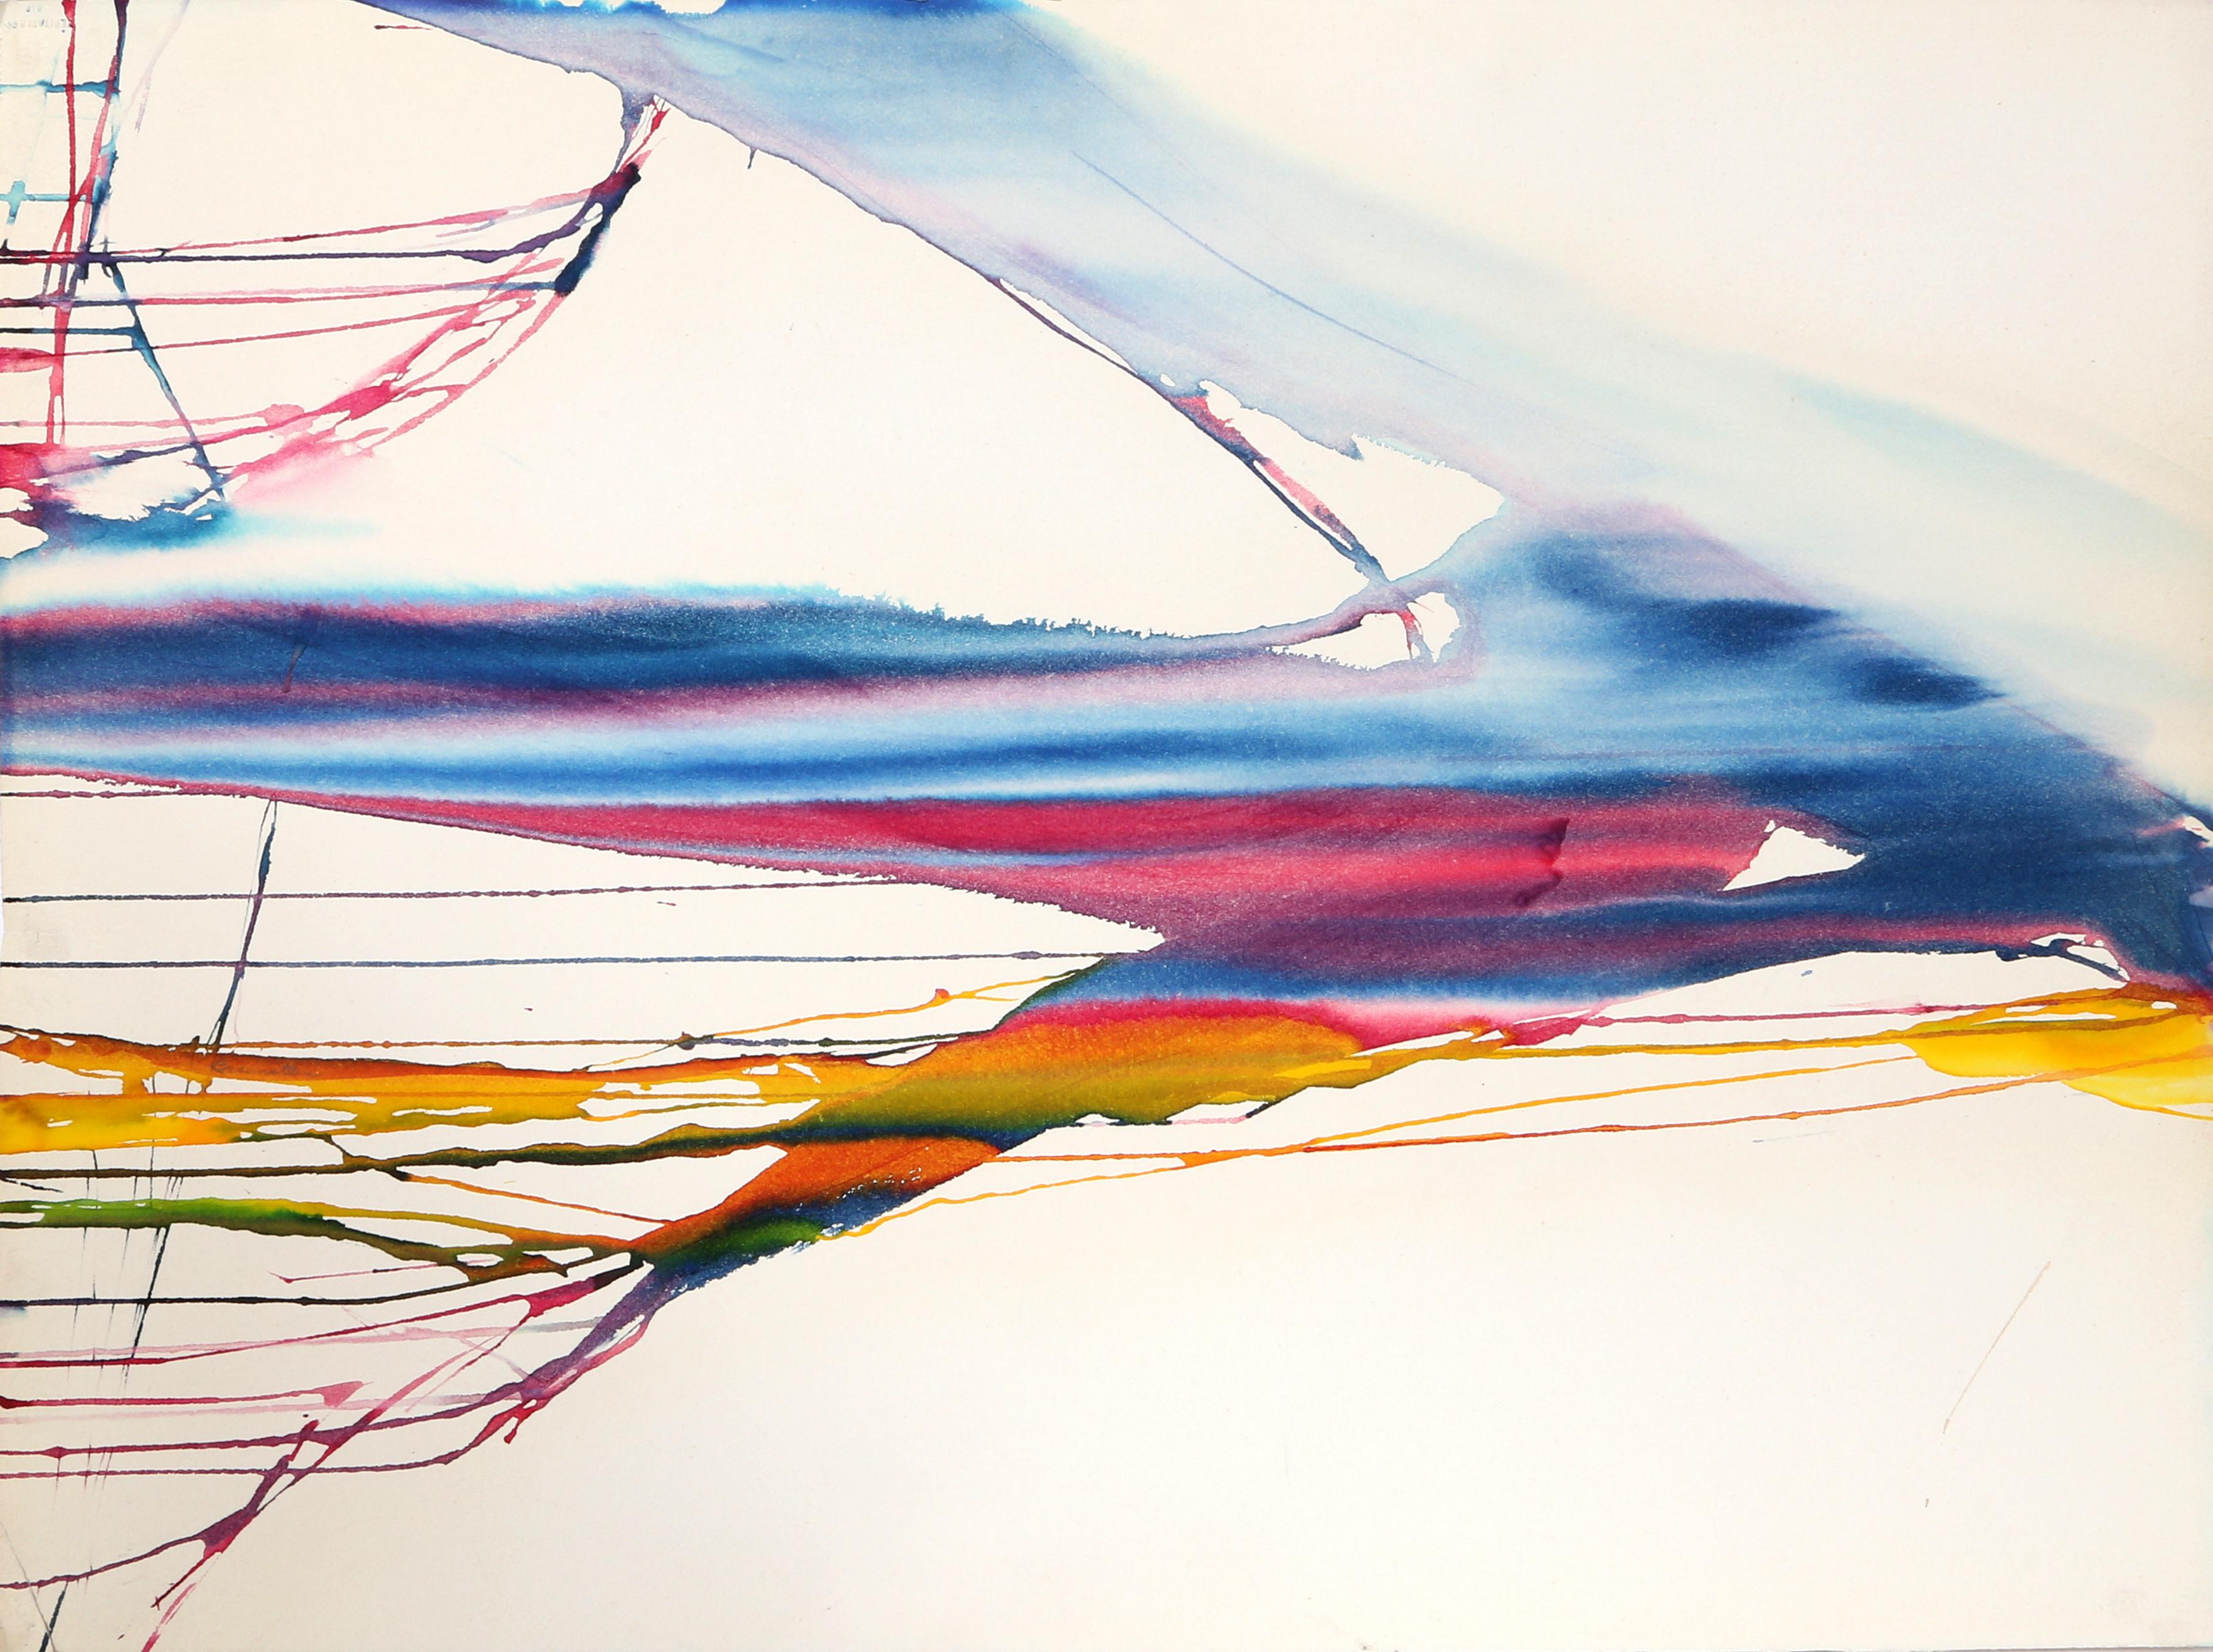 Soaring Storm, Abstract Work on Paper by Geri Taper